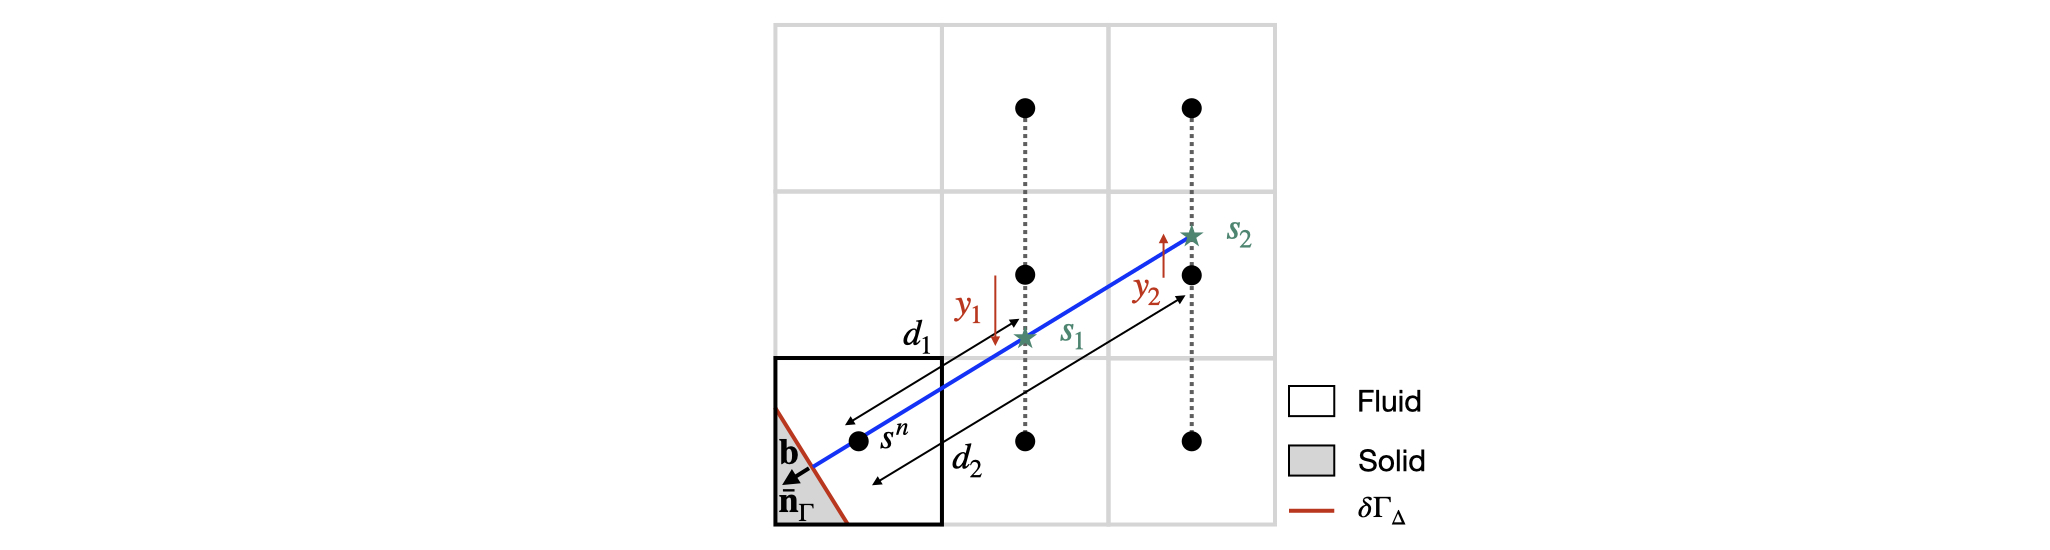 Graphical representation of the methodology used to extrapolate the value of a scalar s at the position c (here chosen as the center of the cut-cell) of a cut-cell.